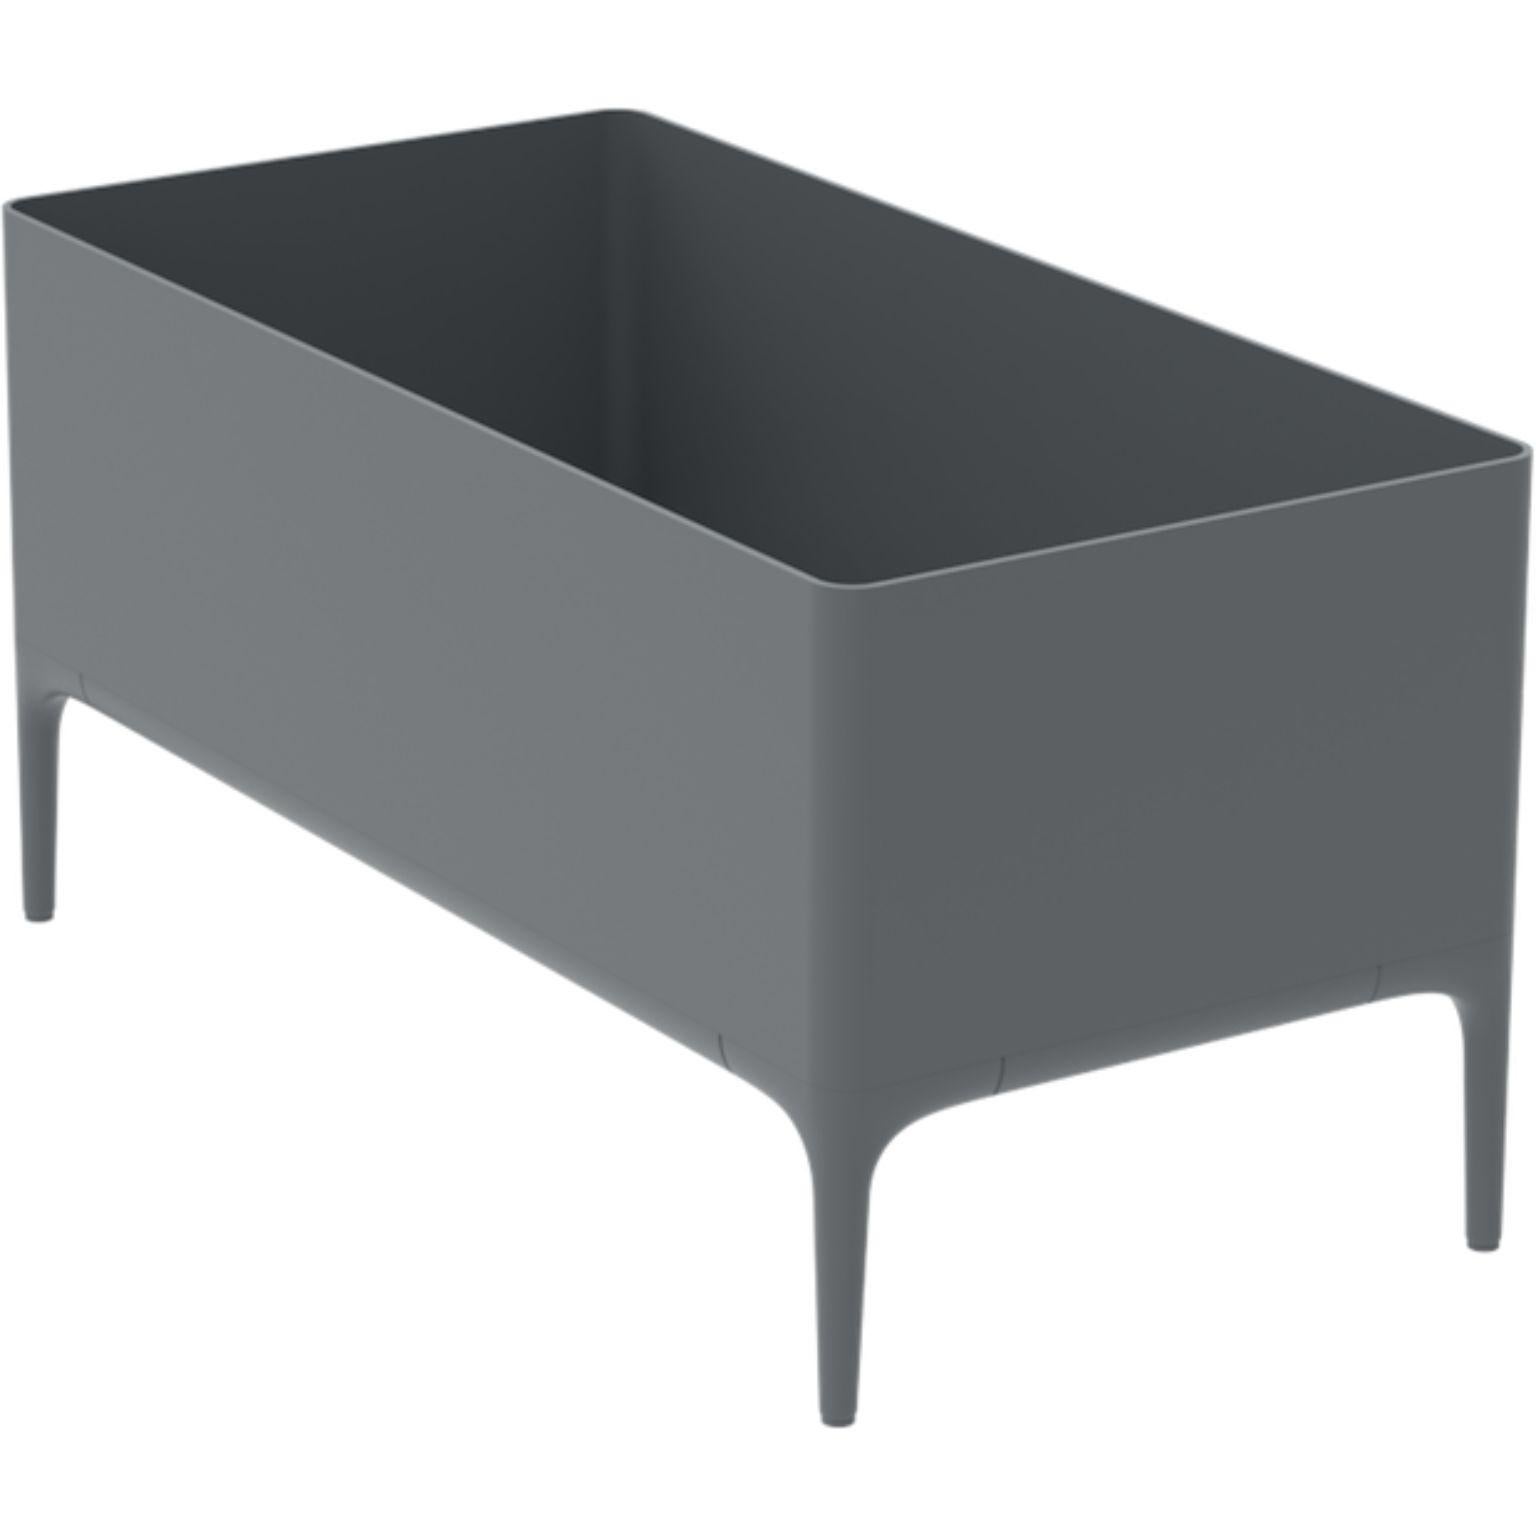 Xaloc Silver Planter by MOWEE
Dimensions: D90 x W45 x H45 cm
Material: Aluminium
Weight: 11 kg
Also Available in different colours and finishes. 

 Xaloc synthesizes the lines of interior furniture to extrapolate to the exterior, creating an